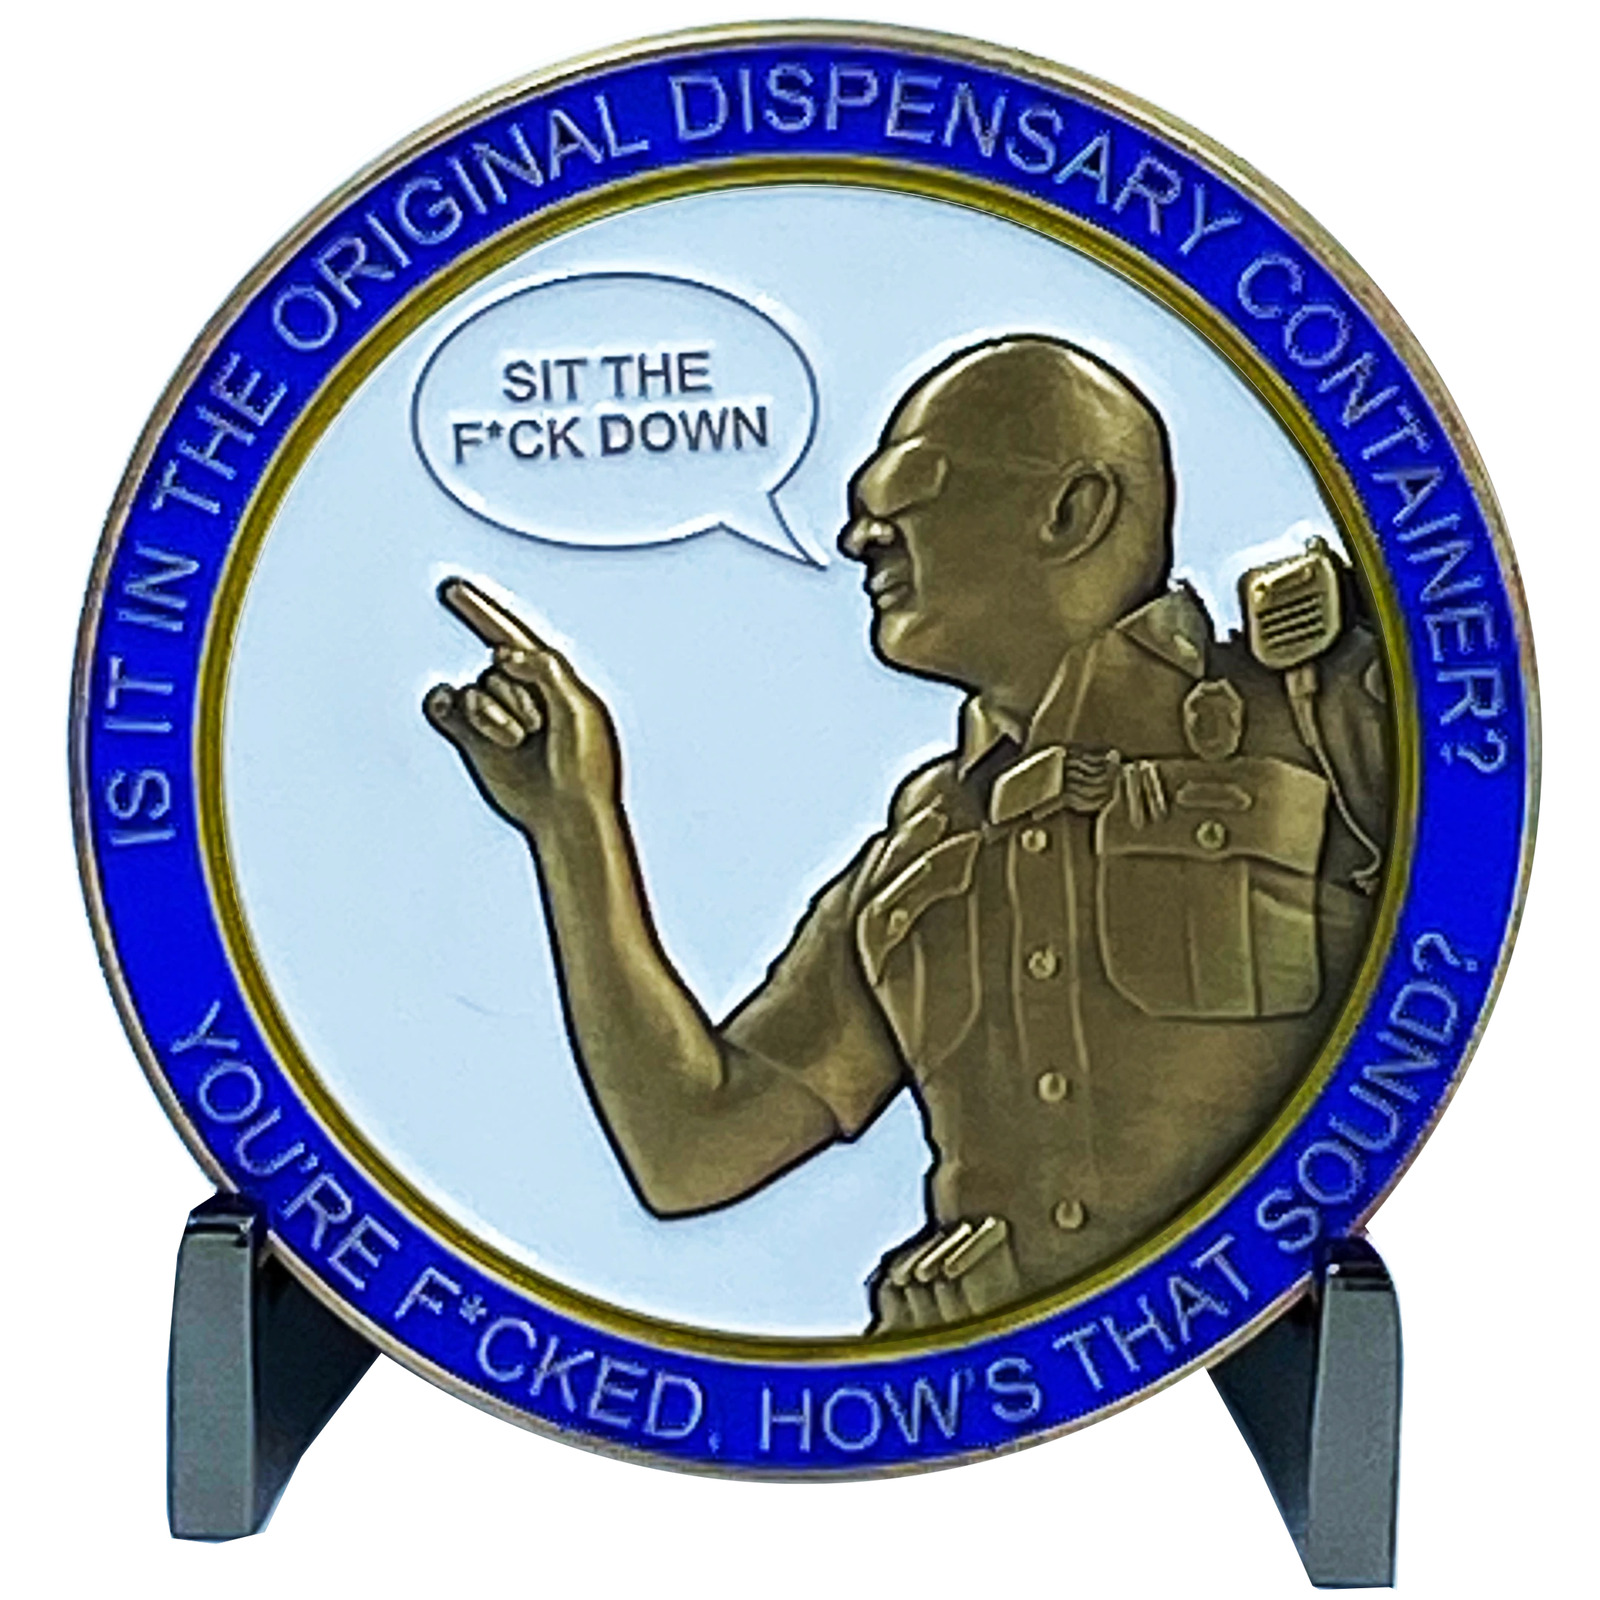 DL1-16 new Version 2 Dispensary Container CSP Challenge Coin inspired by Connect